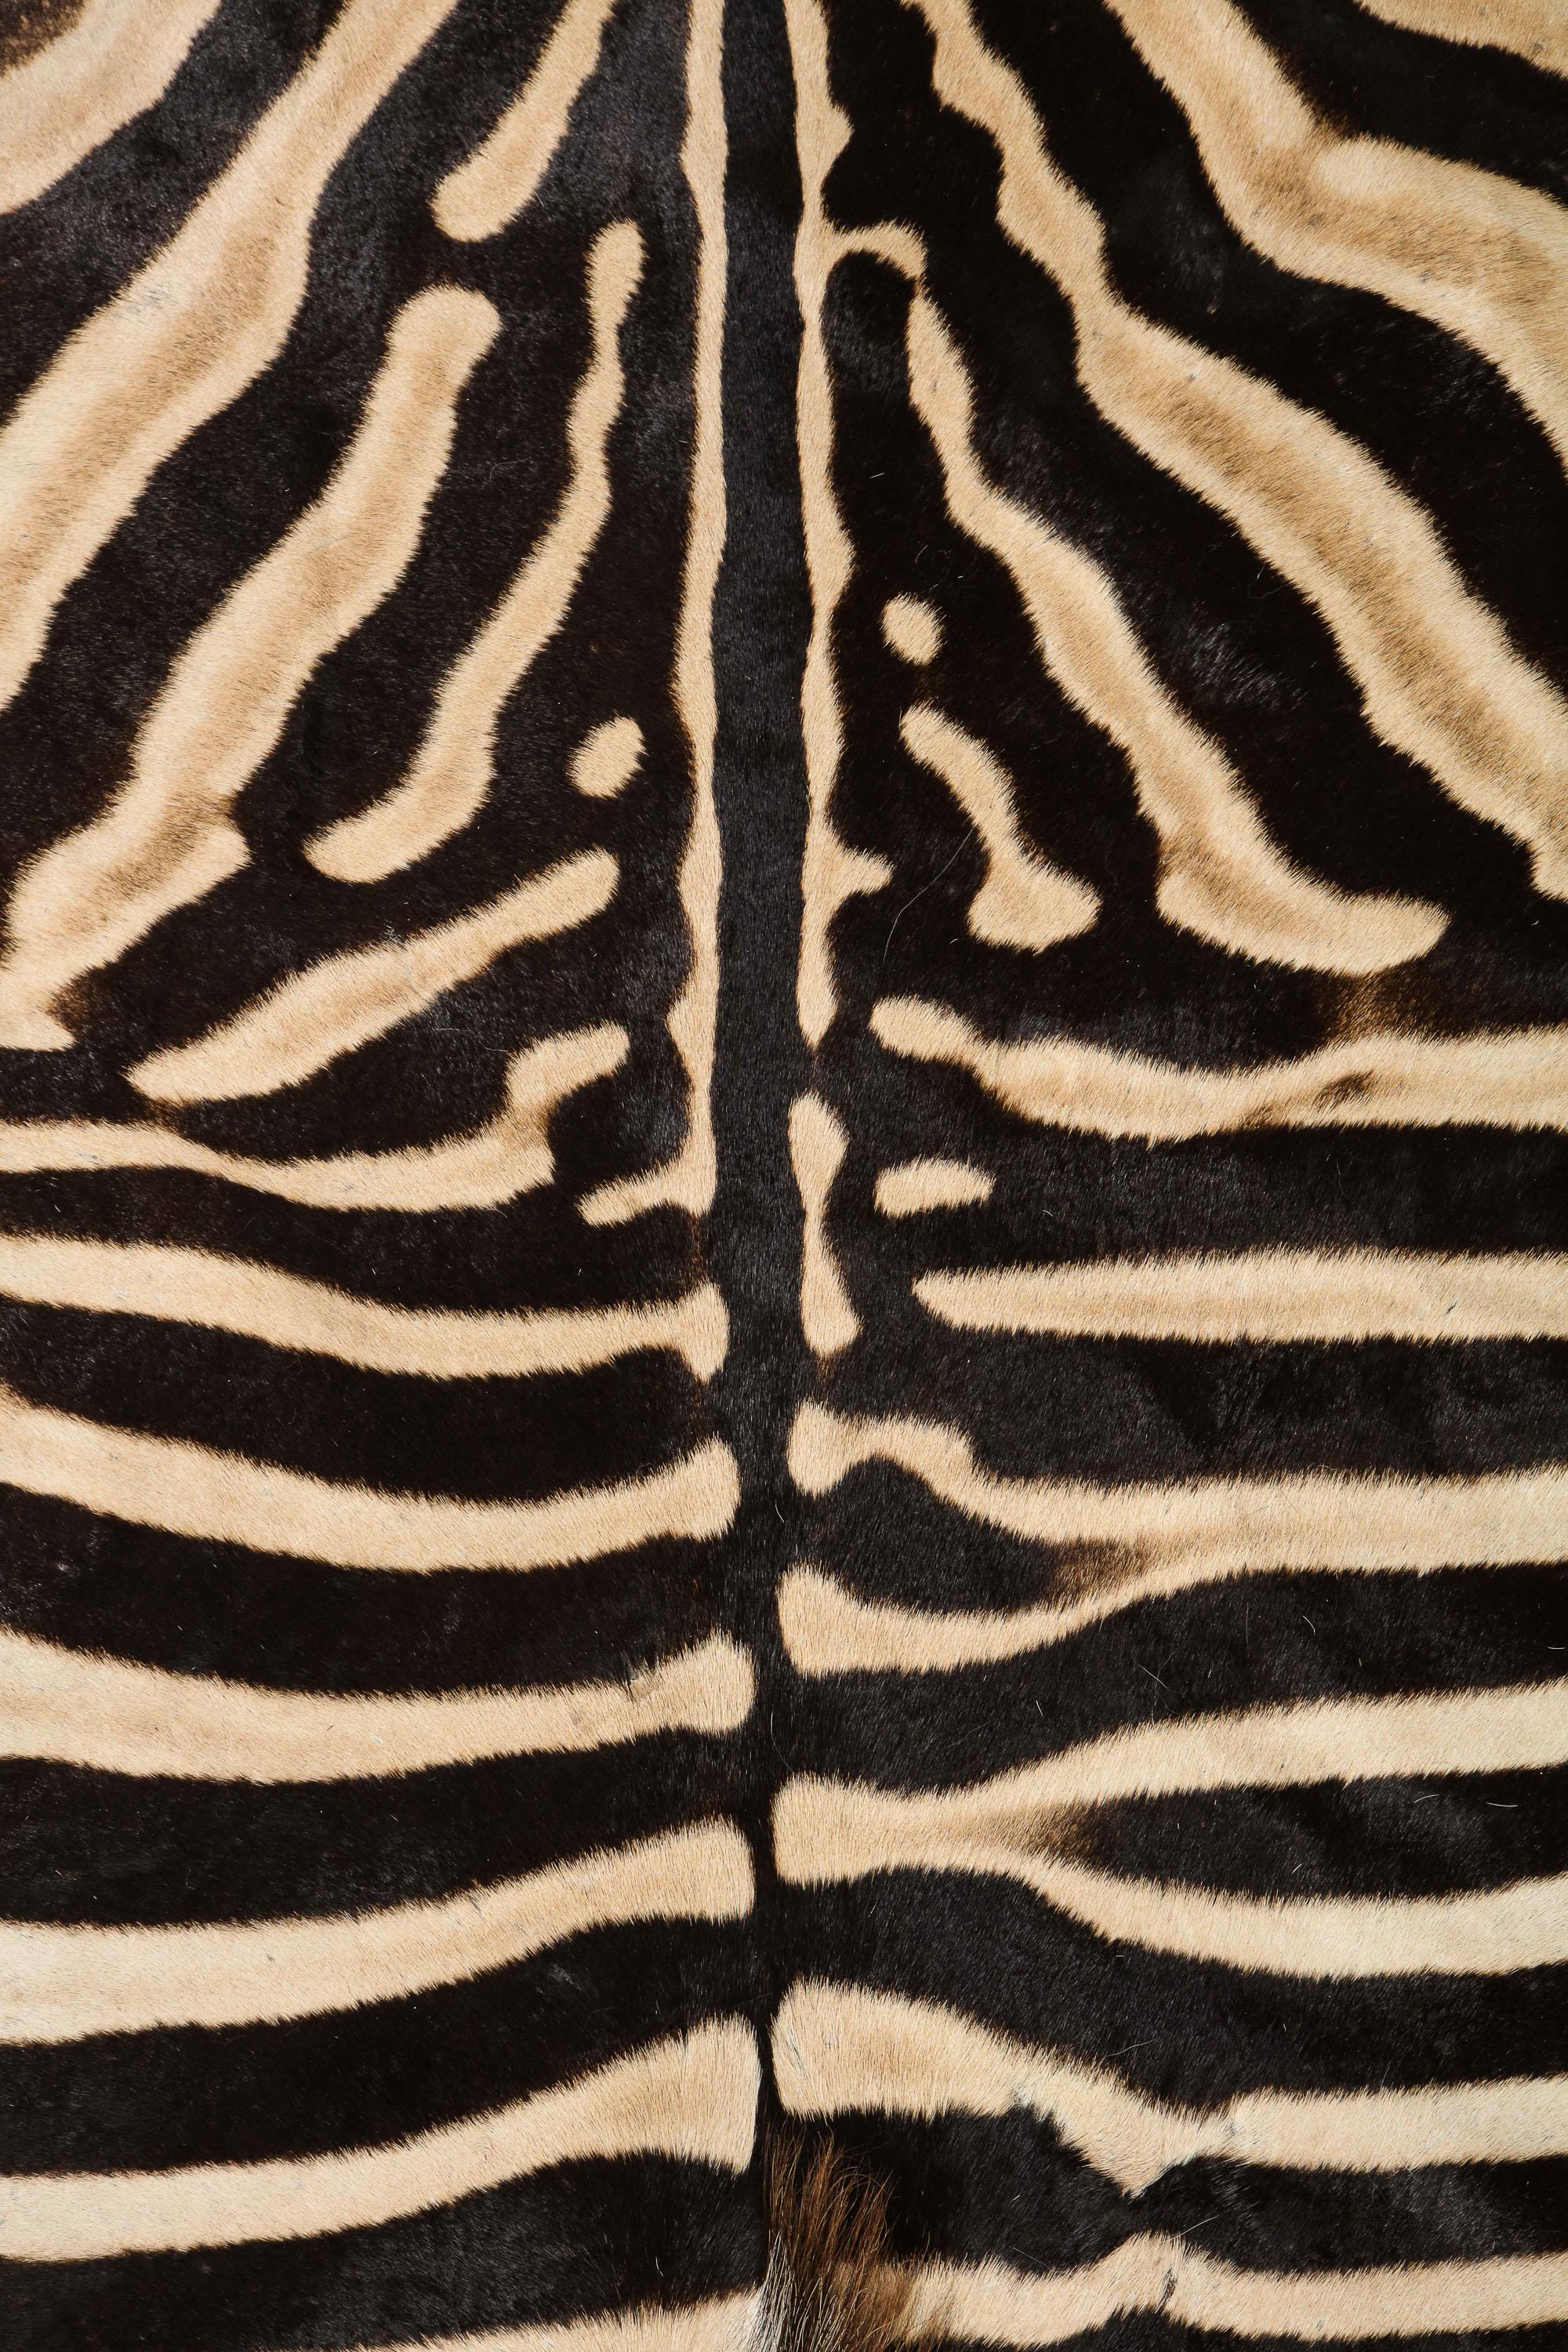 Zebra Hide Zebra Rug, South Africa, Wool Felt Backed with Leather Trim, New Hide, In Stock For Sale